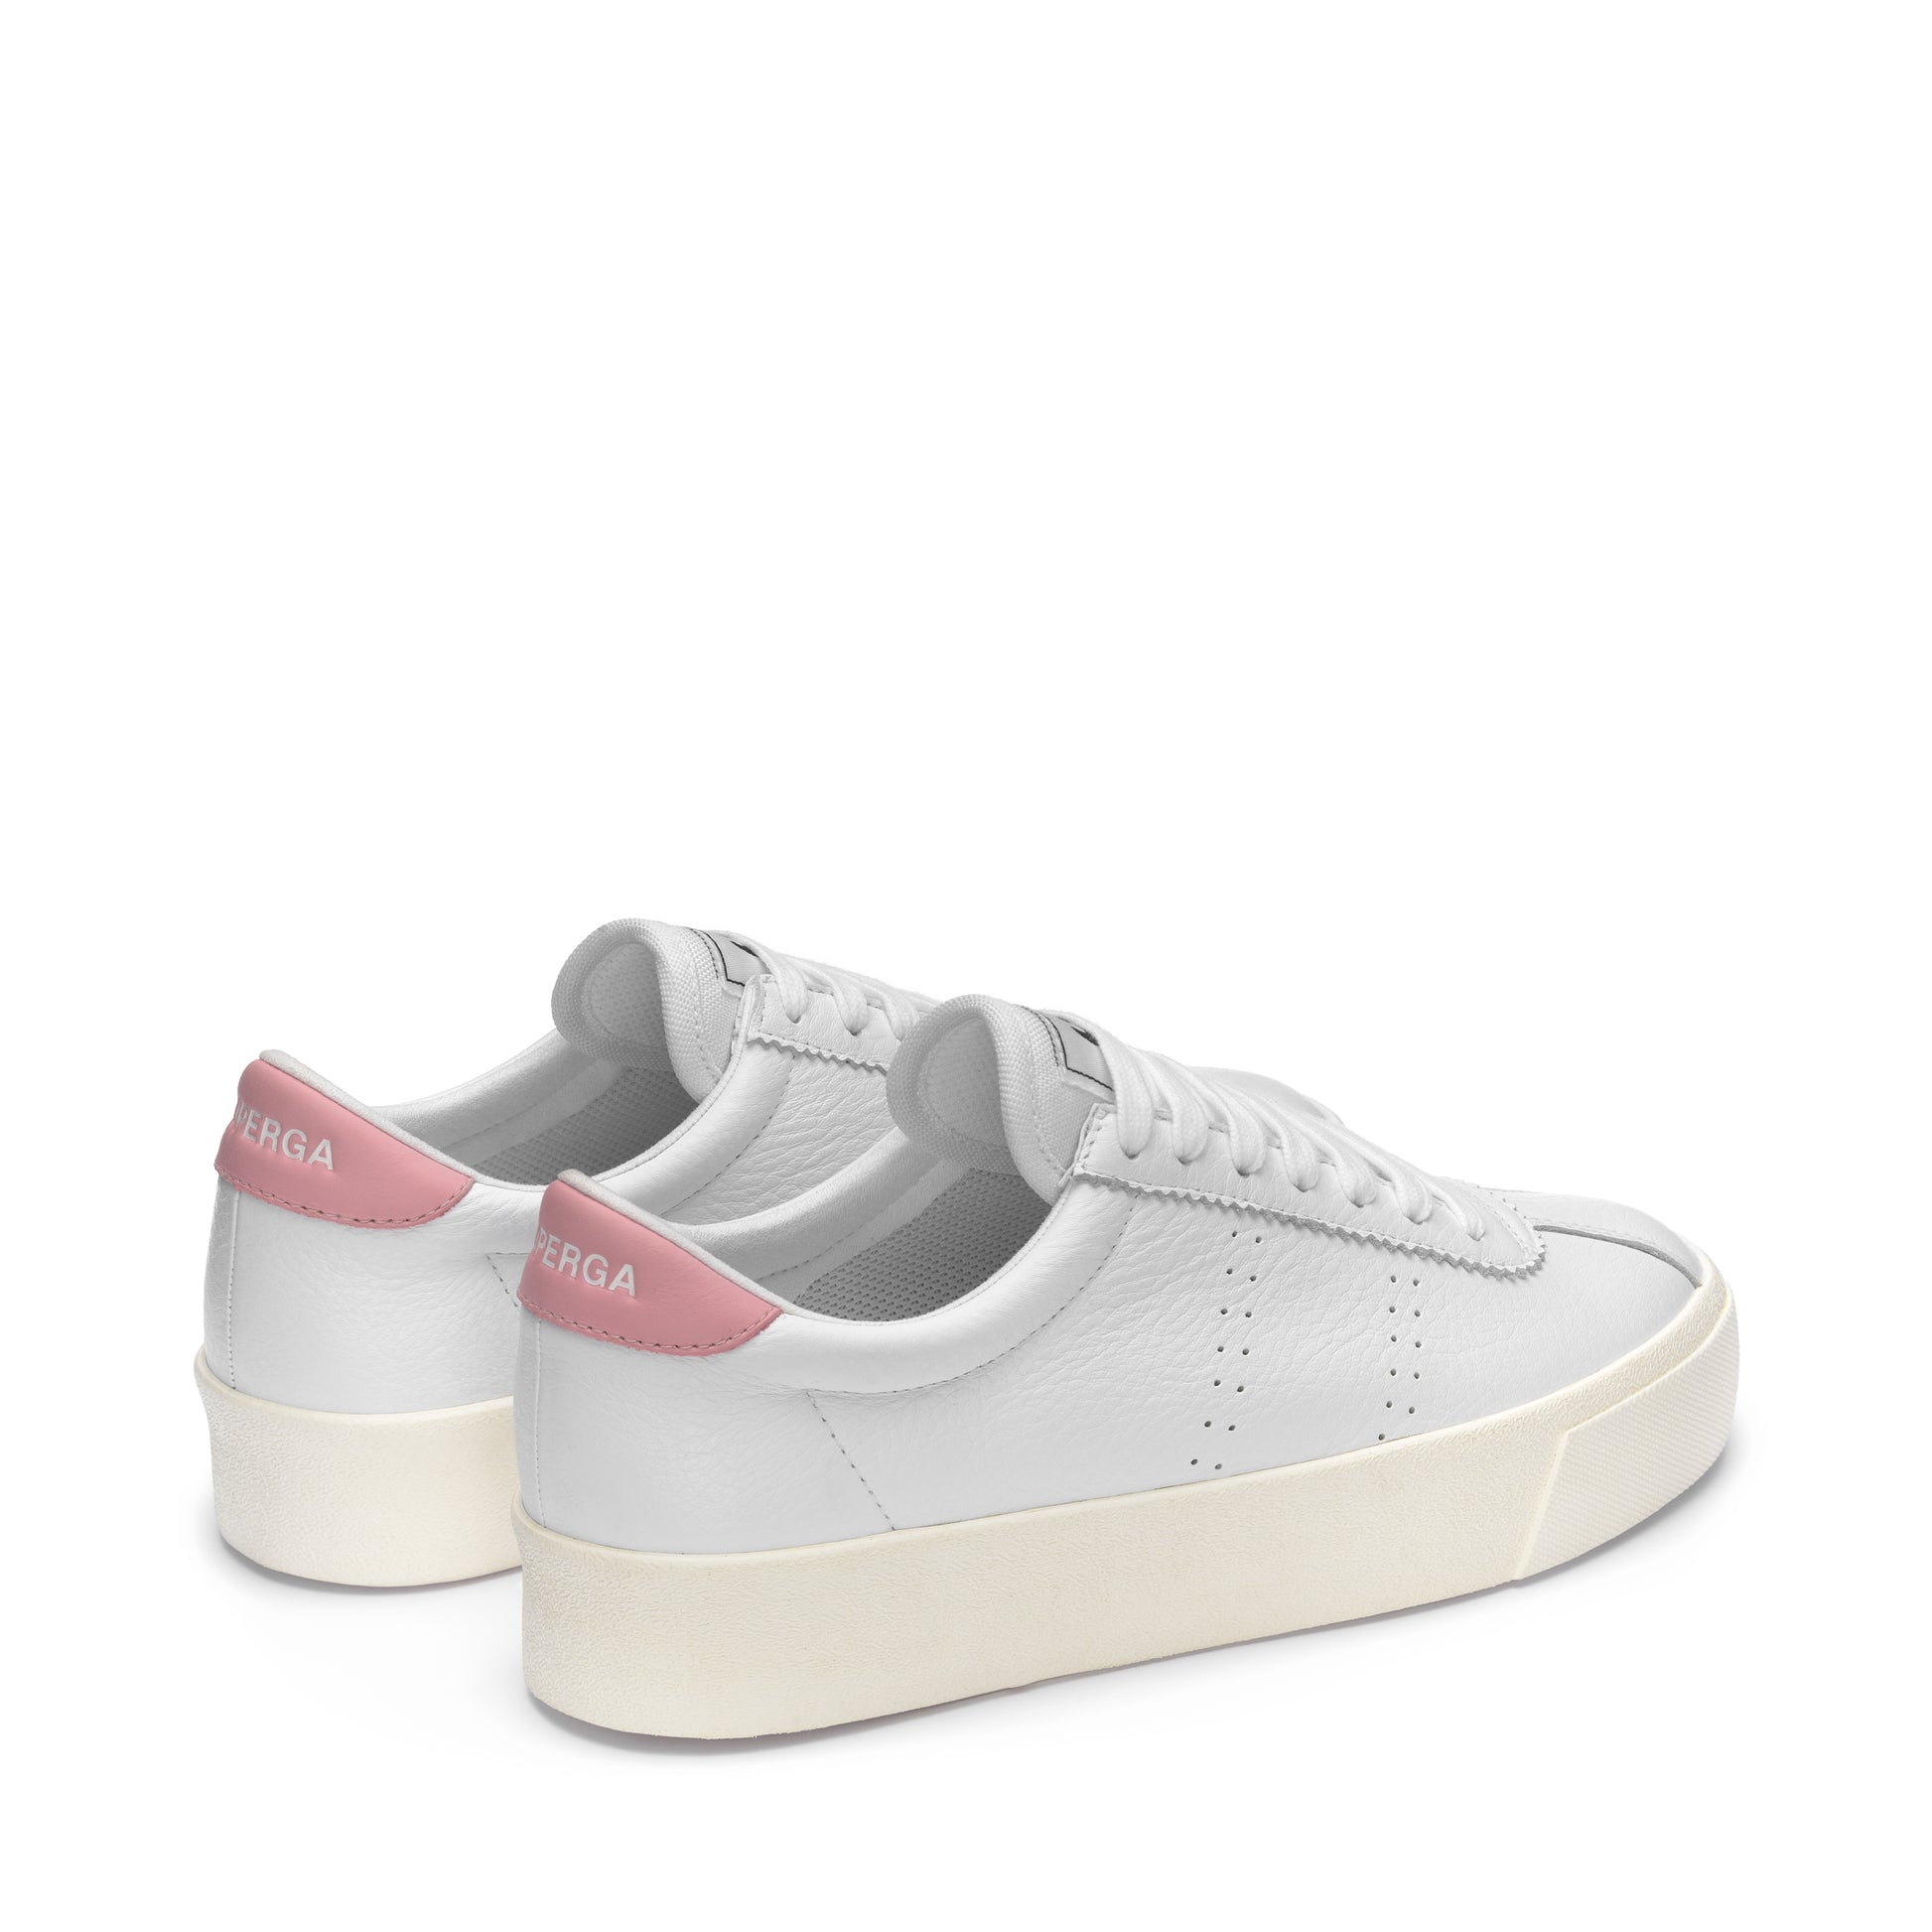 White leather shoes with pink detail and cream platform rubber outer sole slight back view